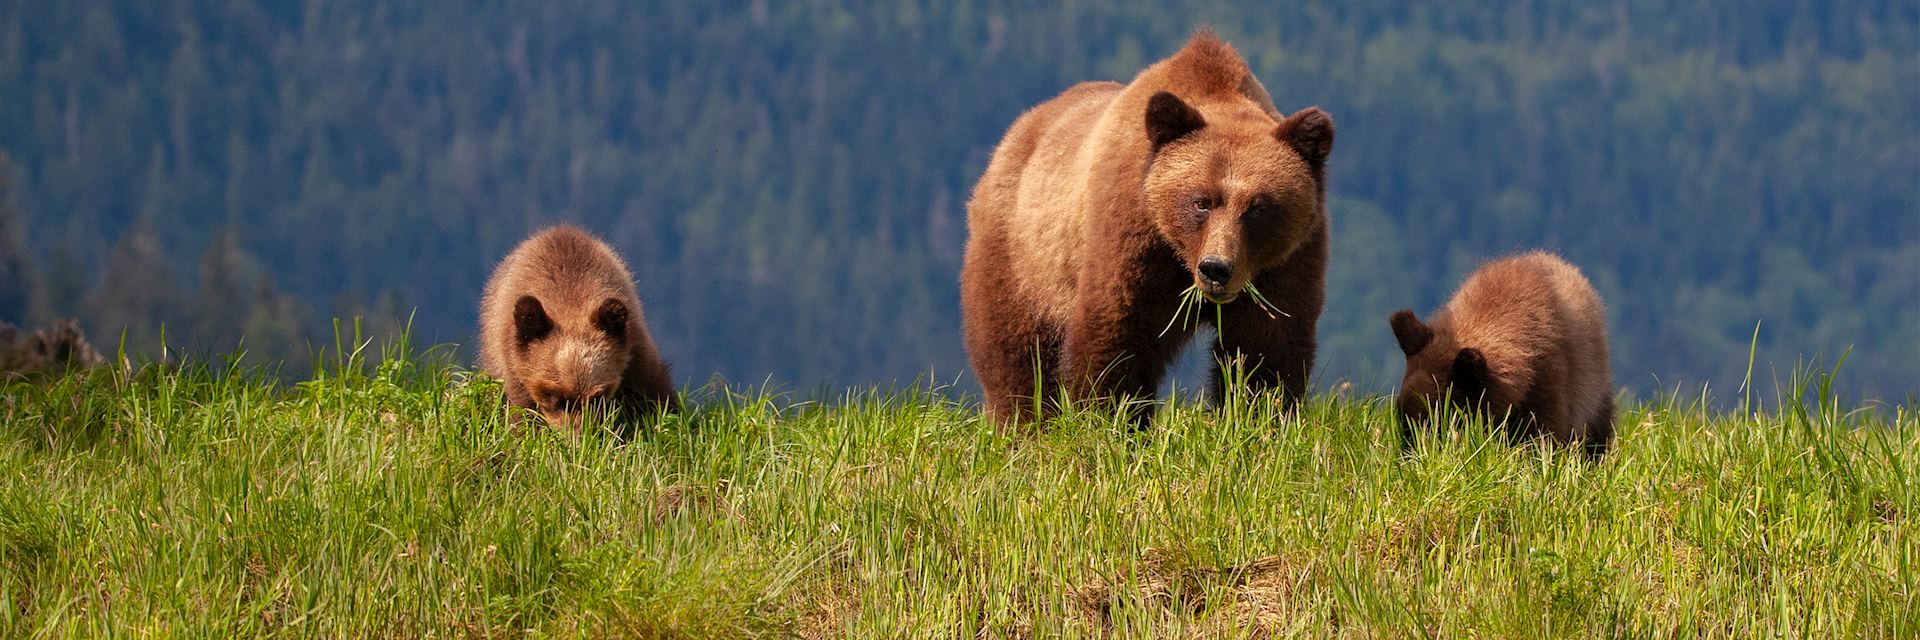 Grizzly bear and her cubs, British Columbia